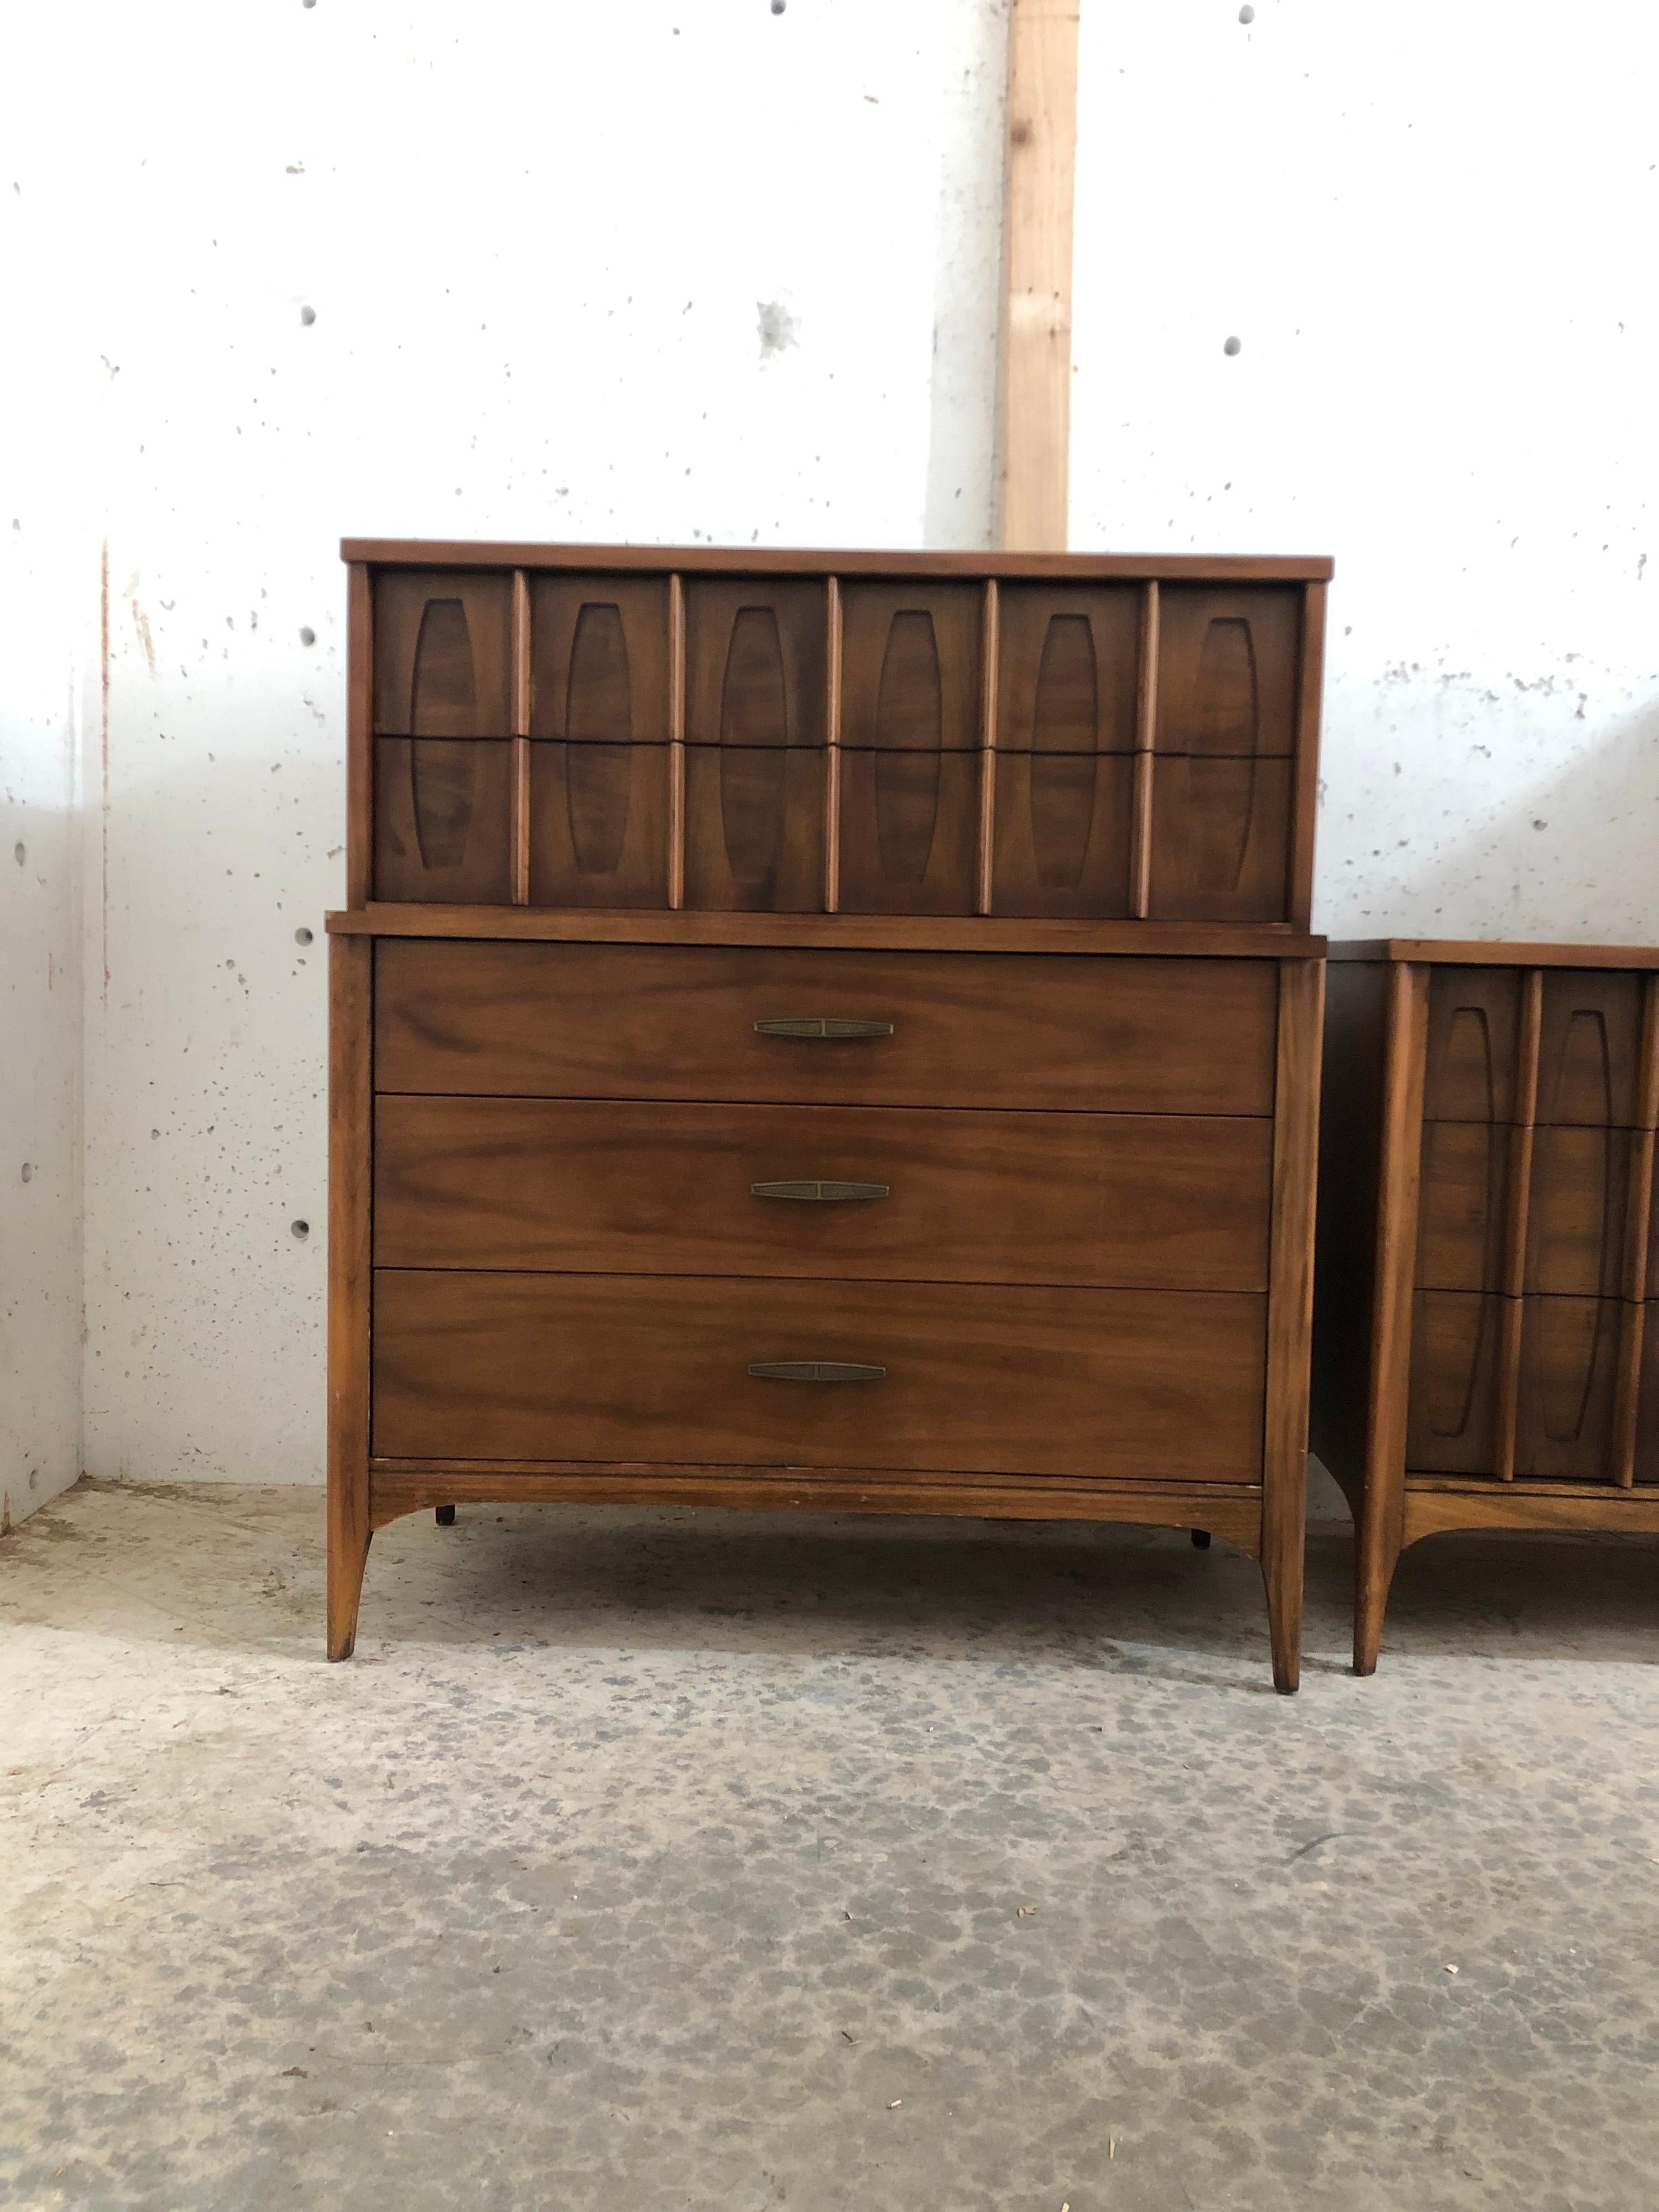 This stylish Kent Coffey dresser has lovely recessed scalloped accents and vertical wood pulls! Sleek and sculpted design with textured brass pull on bottom three drawers and solid walnut wood.

Dimensions: 40 W 18 D 46 H.